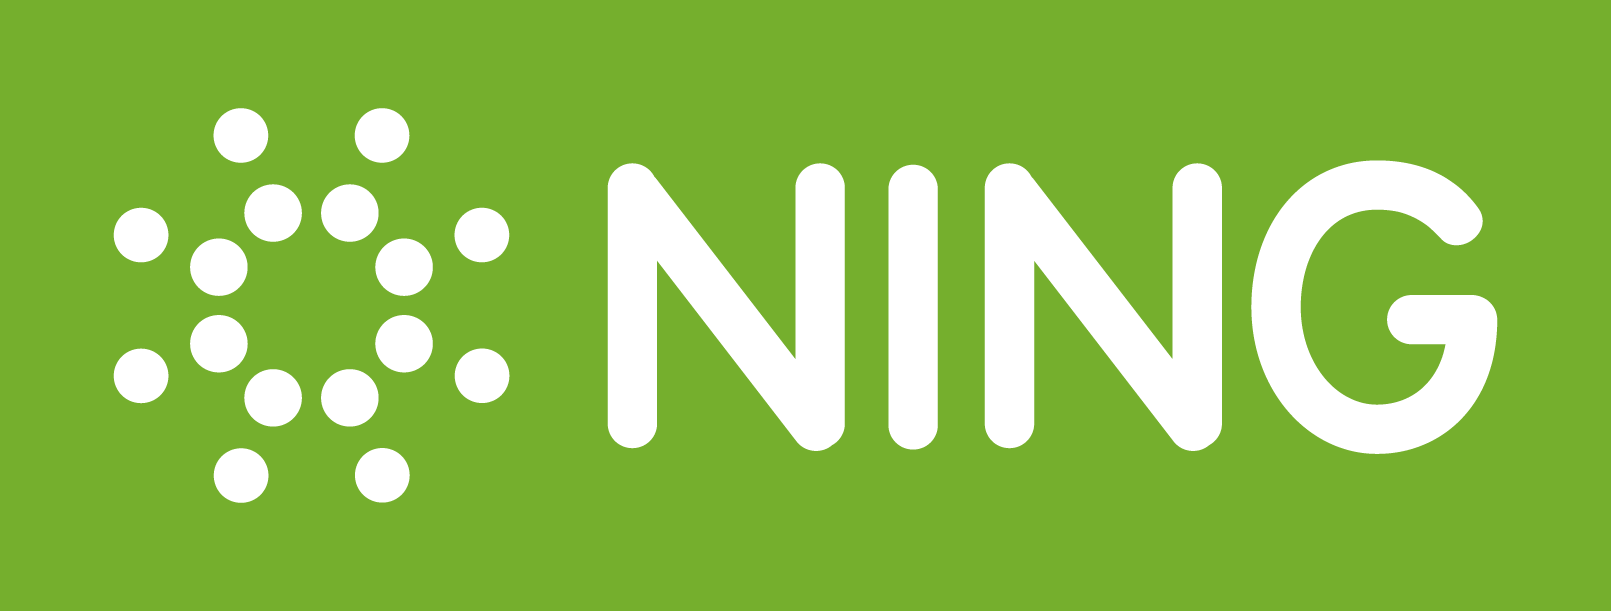 Ning Logo - 1-ning-10-start-your-own-social-network - https://10awesome.com